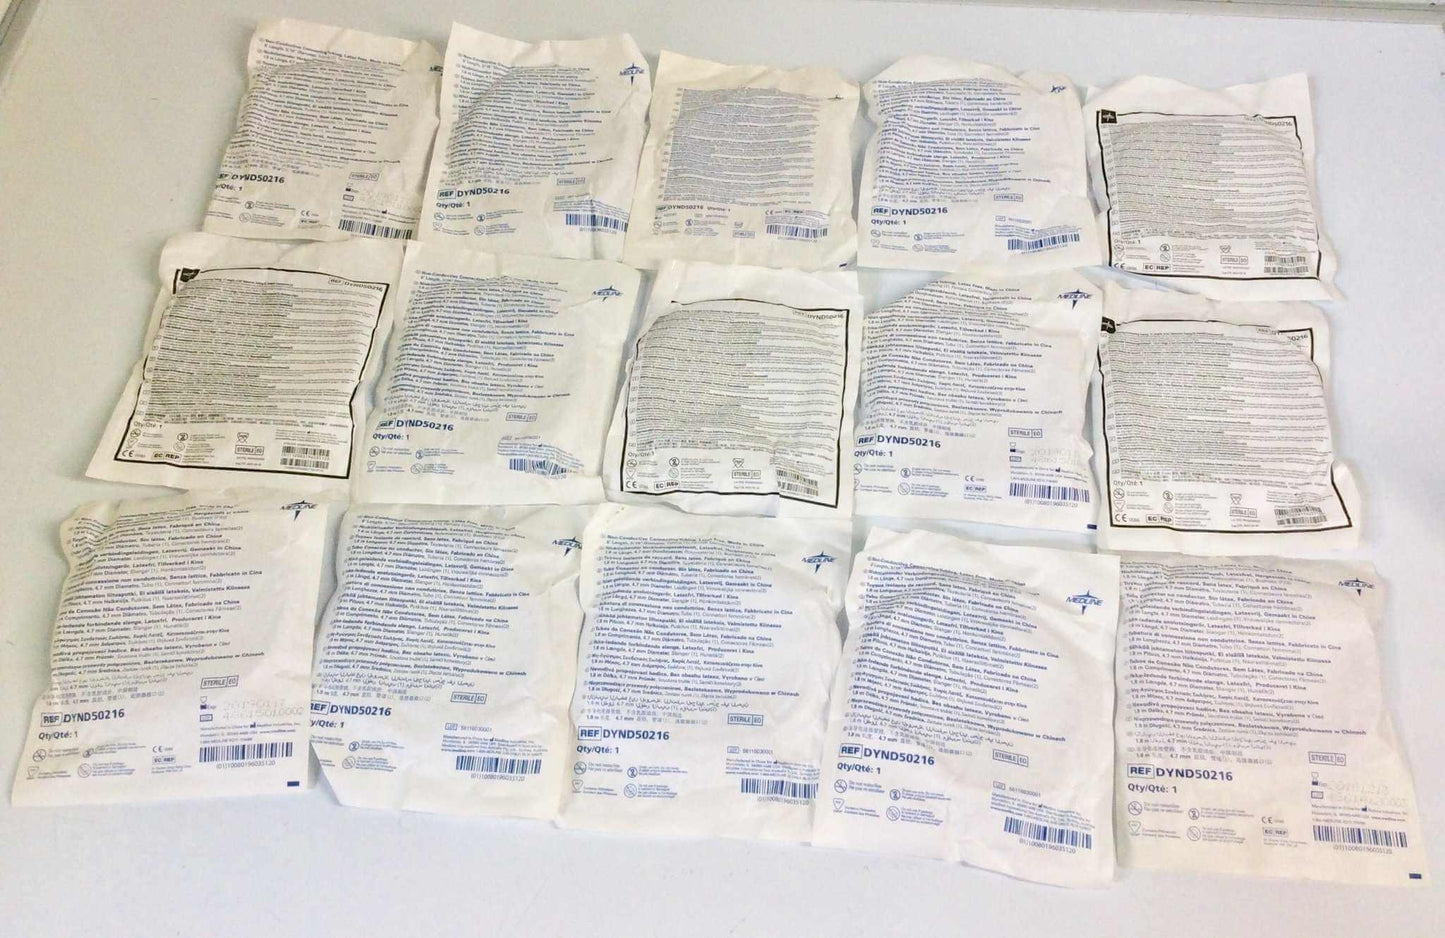 Lot of 15 NEW Medline Sterile Non-Conductive Suction Tubing DYND50216 FREE Shipping - MBR Medicals